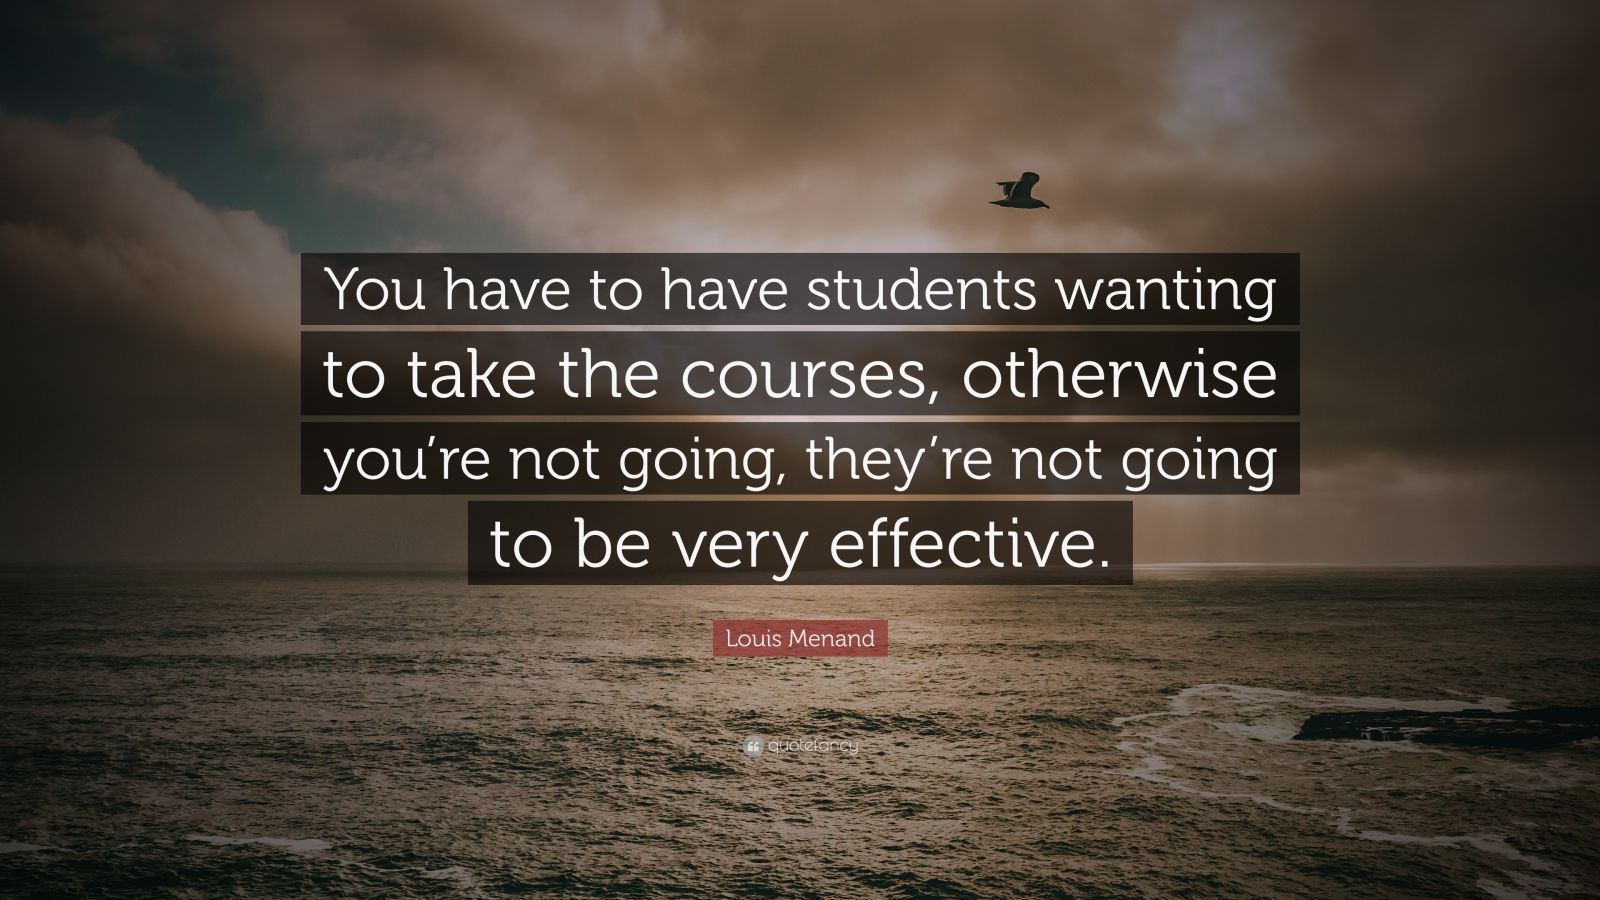 Louis Menand Quote: “You have to have students wanting to take the courses, otherwise you’re not ...